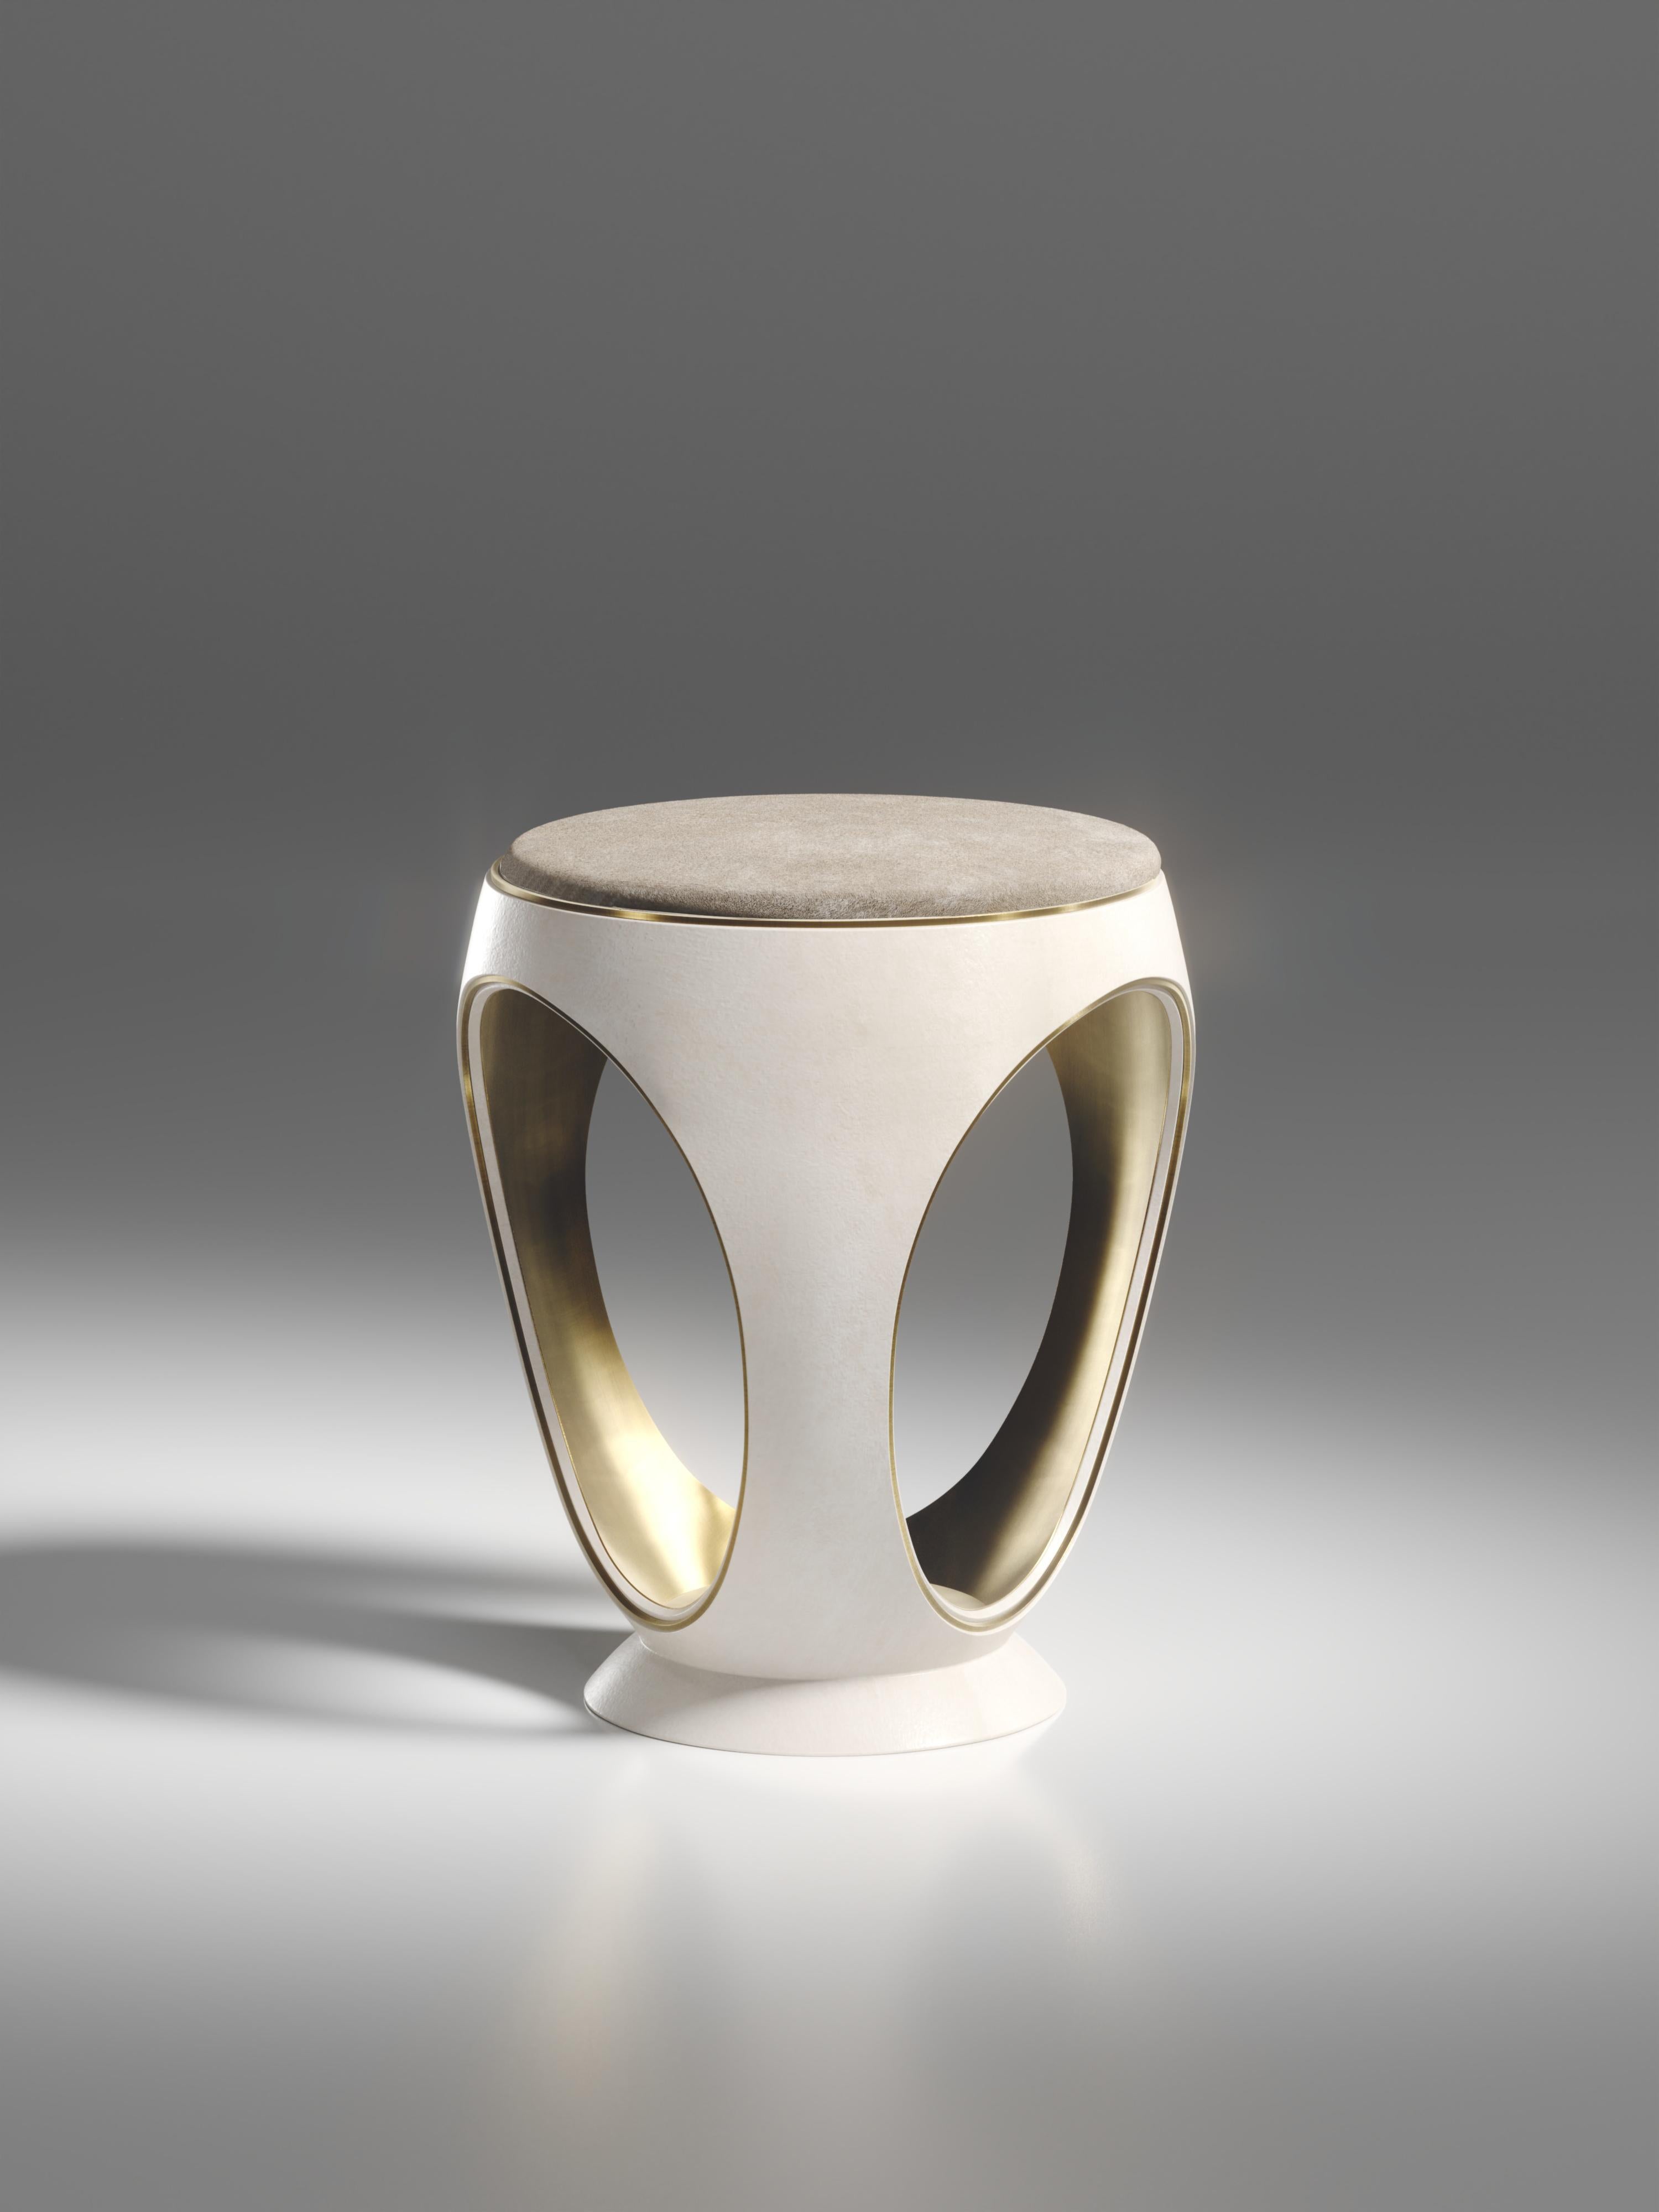 The ring stool in cream parchment is one of the most iconic pieces of the R&Y Augousti Collection. A Sculptural, jewel-like shape, this piece has been revamped with a discreet bronze-patina brass indentation detail on the exterior, as well as the